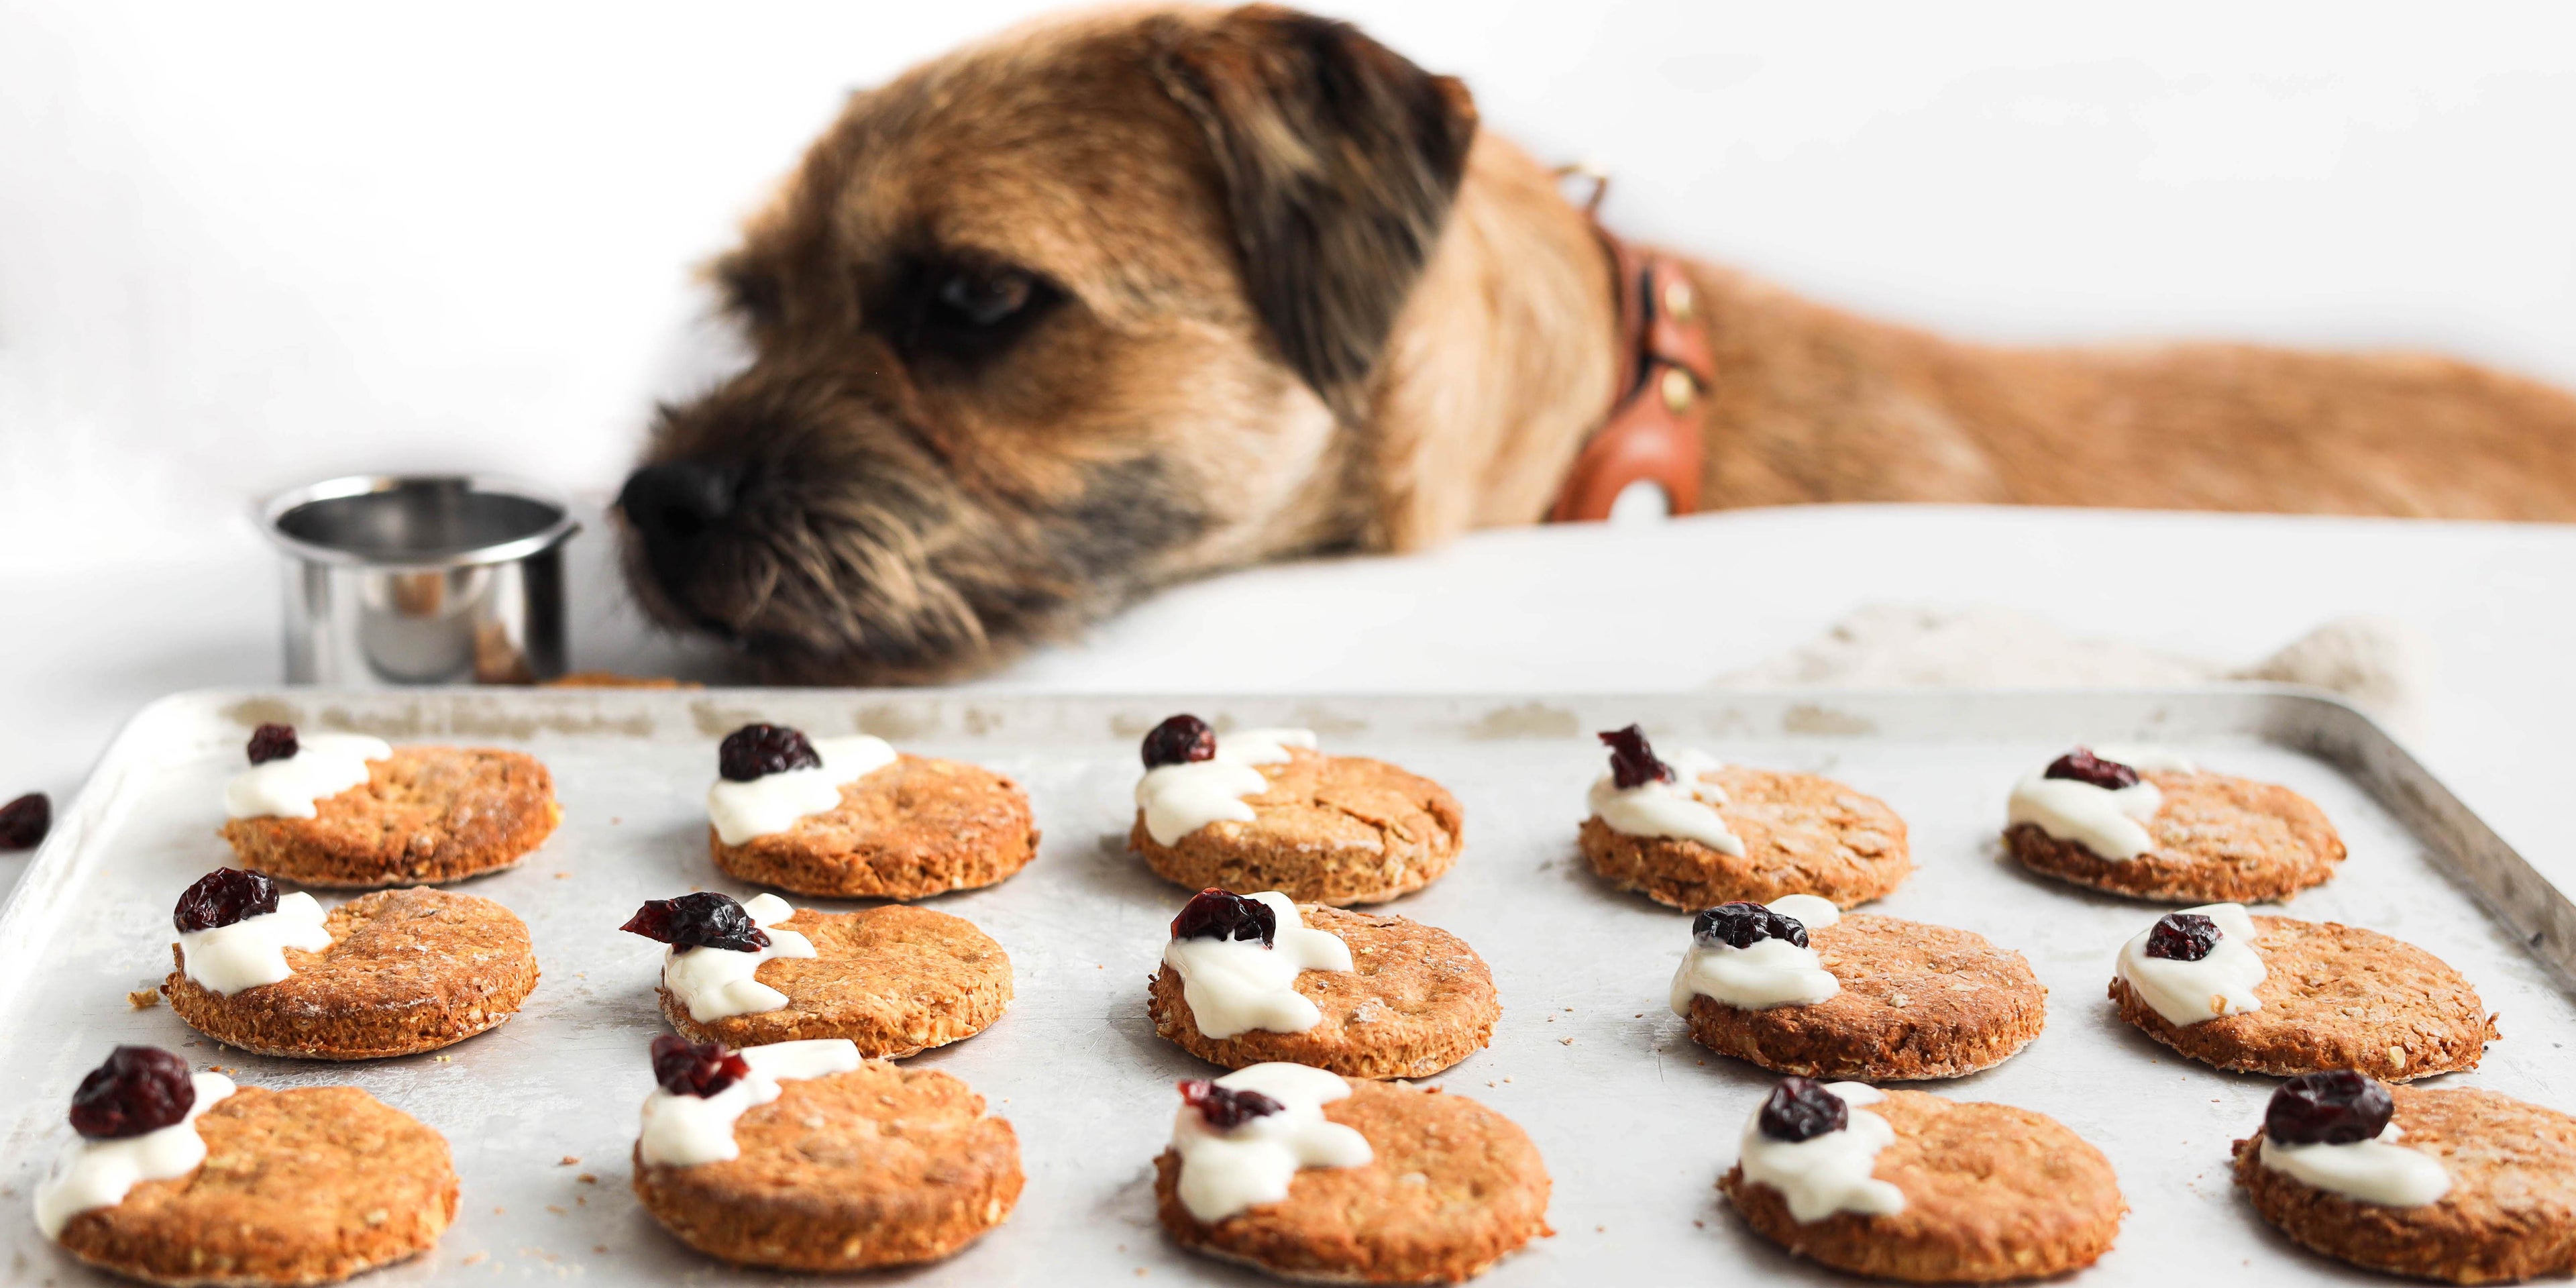 A plate of homemade dog treats with a dog in the background